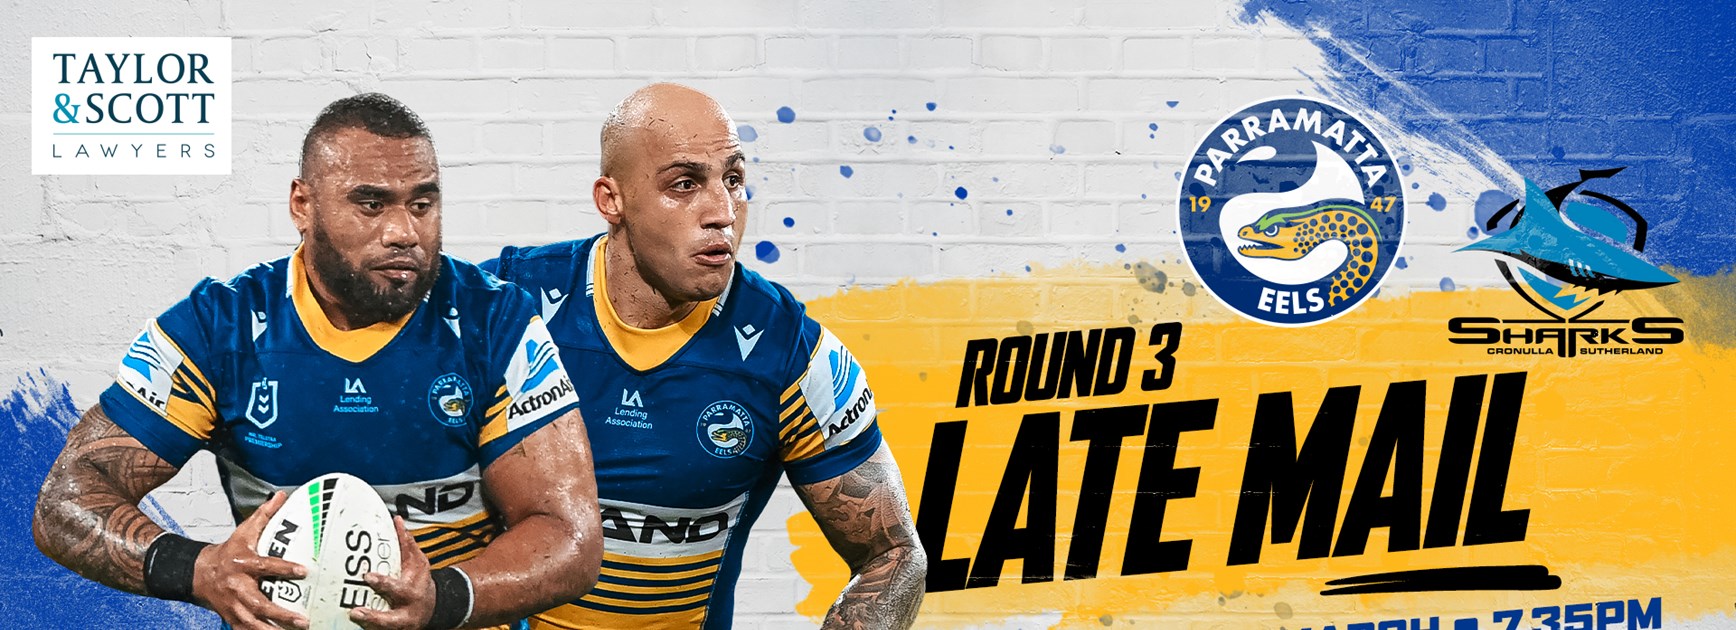 Late Mail - Eels v Sharks, Round Three